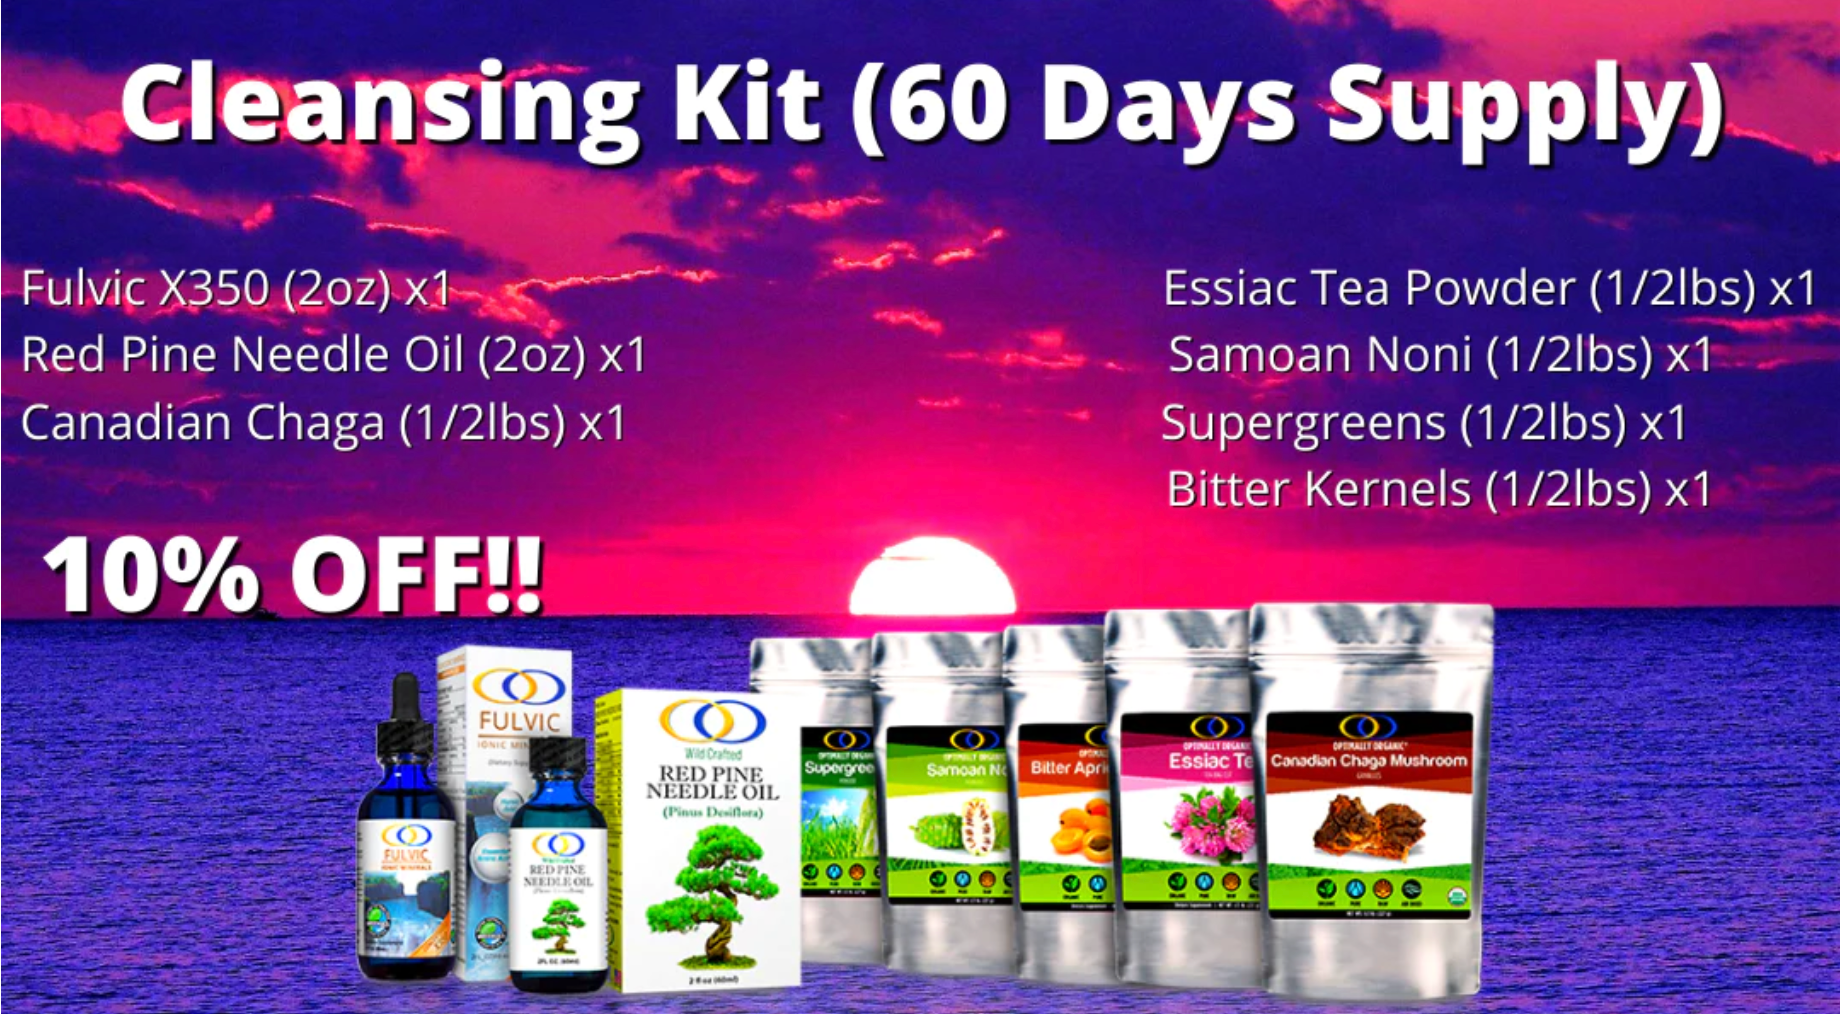 Cleansing Kit # 1 - 60 Day Supply - 10% Off!!!